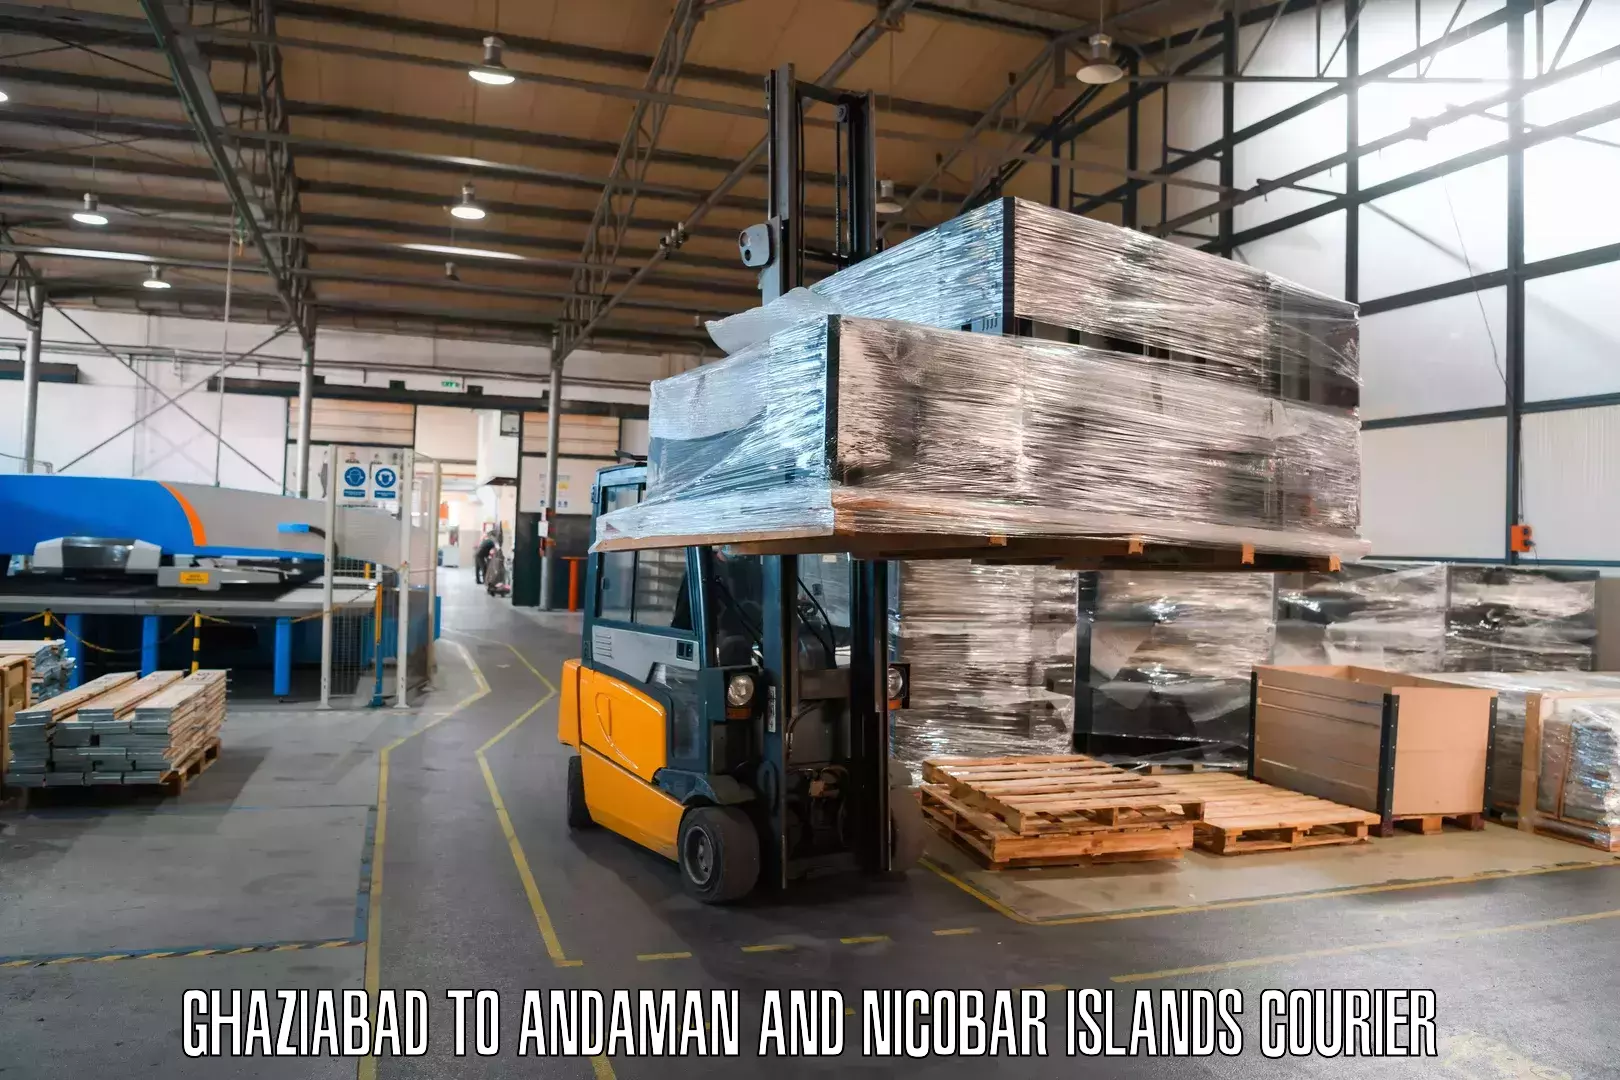 Reliable logistics providers Ghaziabad to Andaman and Nicobar Islands